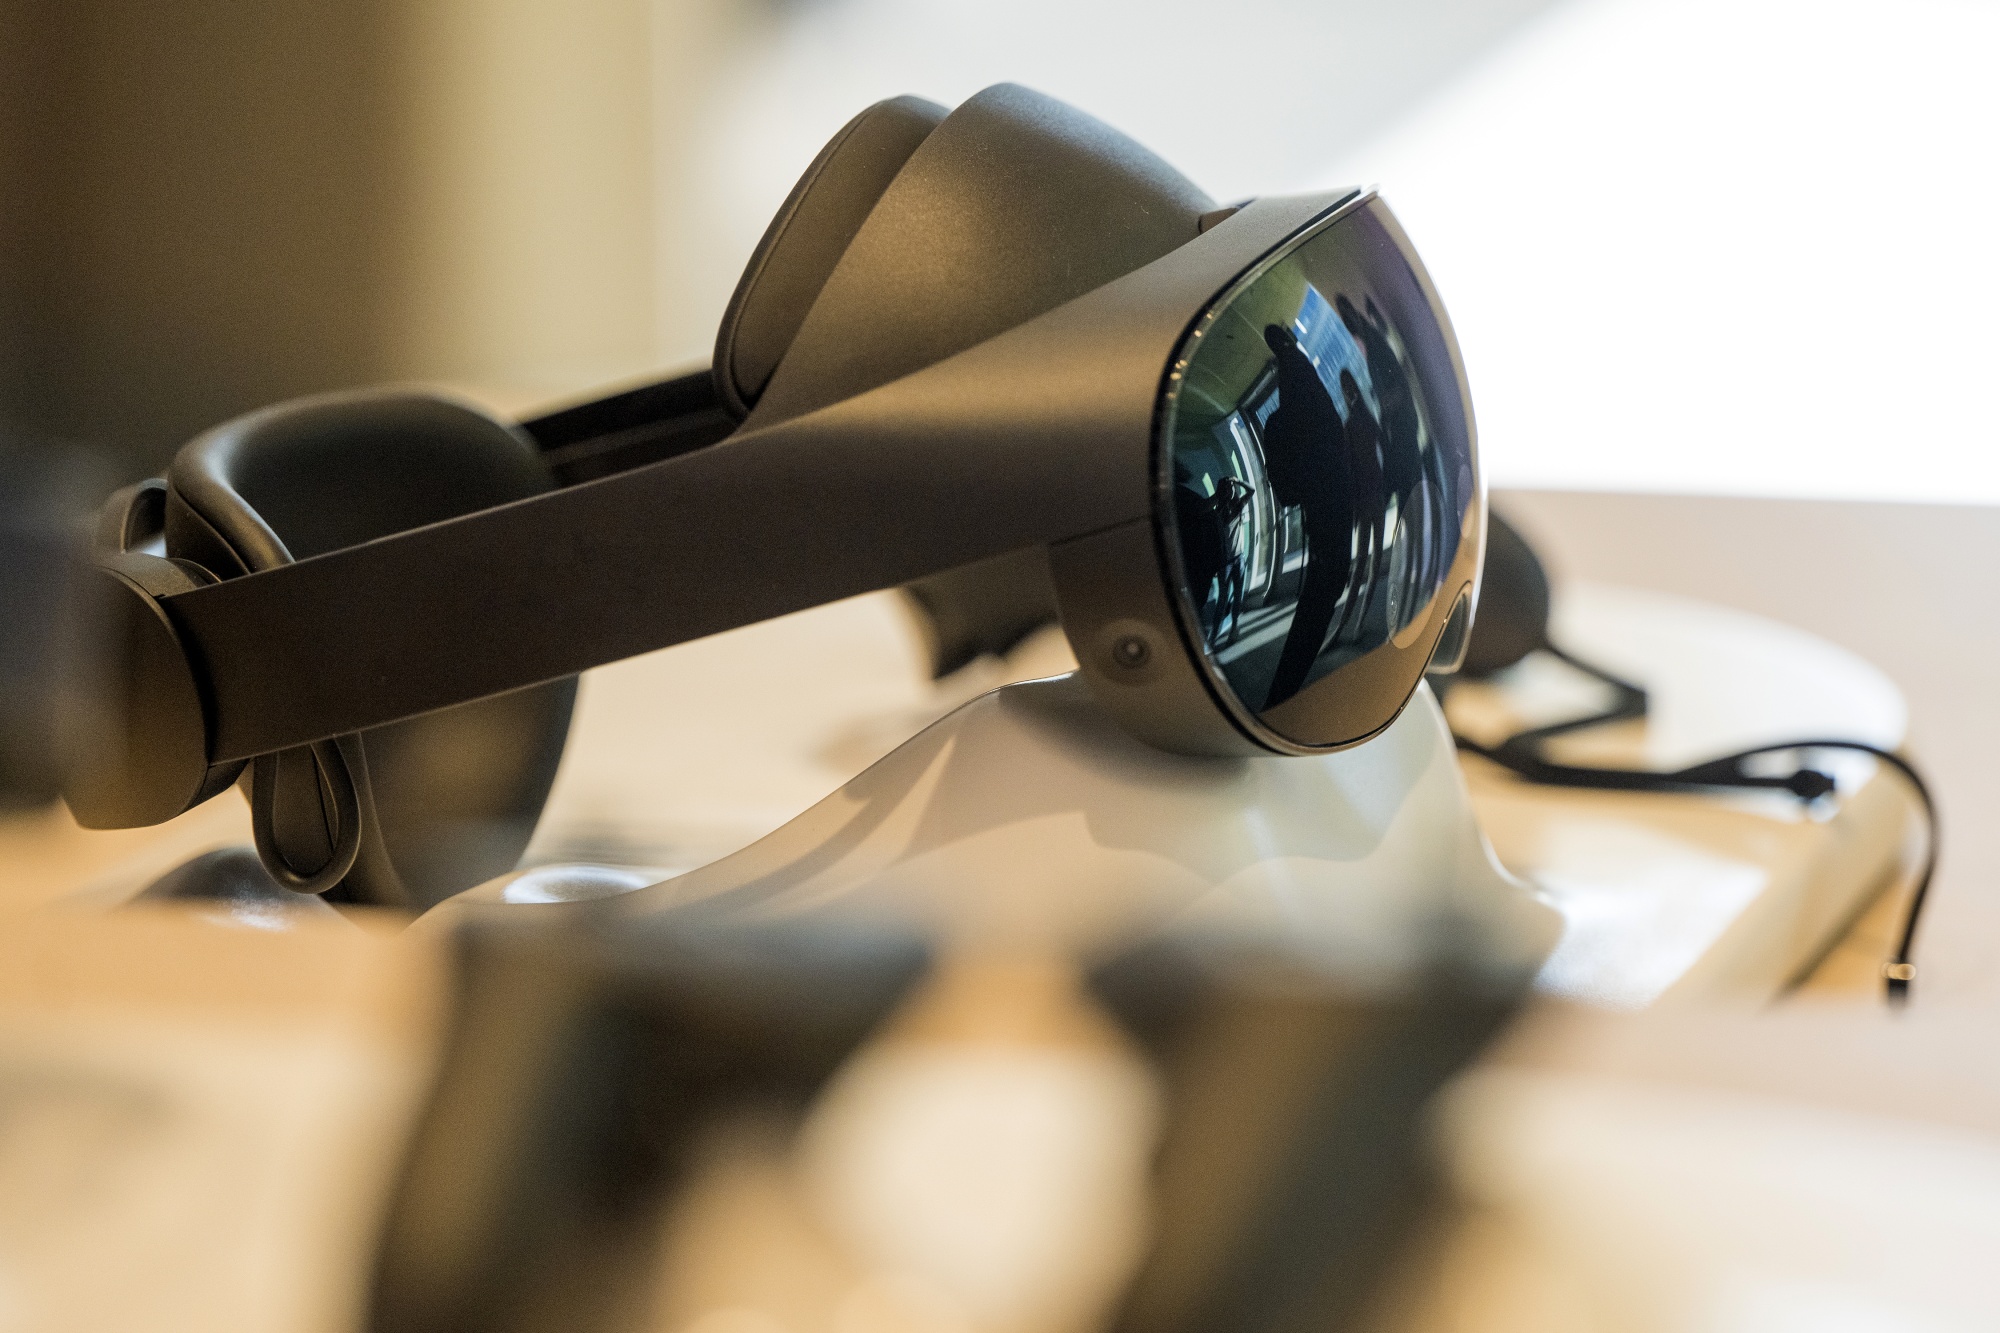 AuraVisor makes VR totally wireless and affordable at last